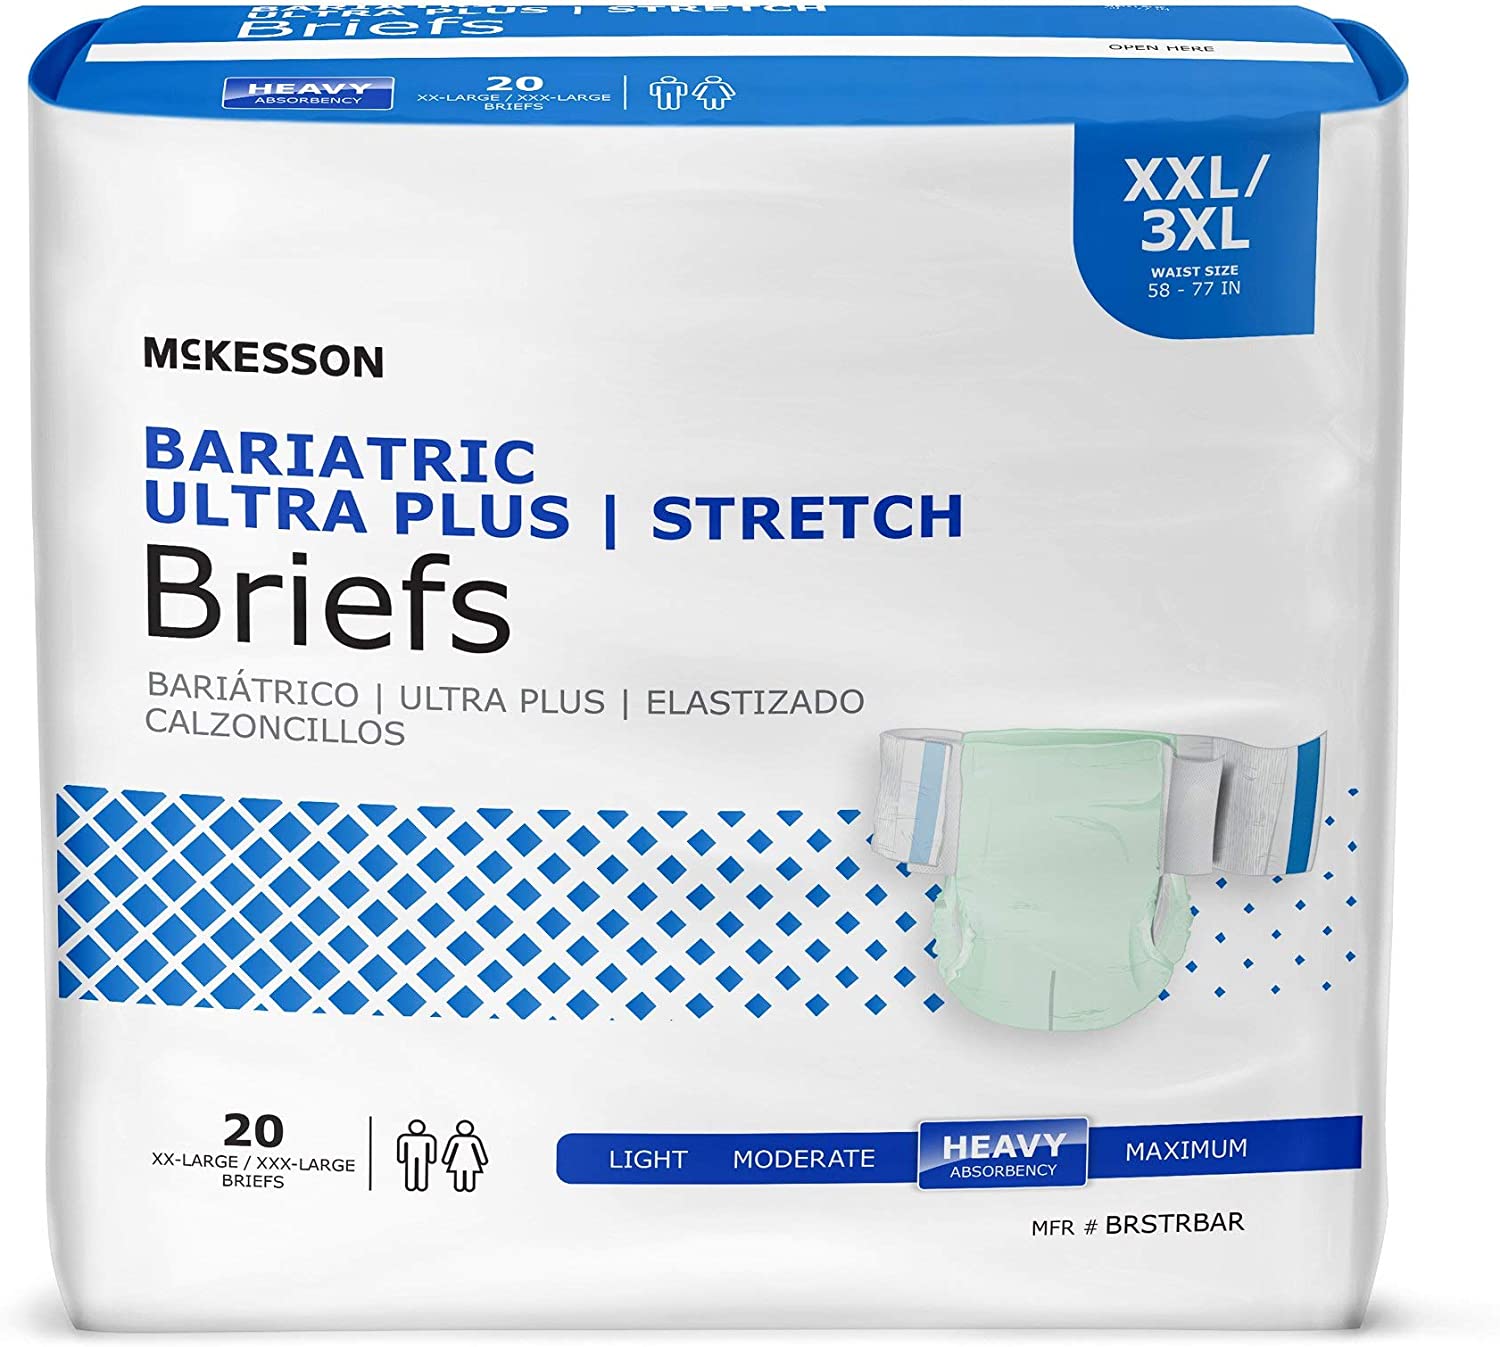 McKesson Bariatric Ultra Plus Stretch Briefs, Incontinence, Adult Unisex, Heavy Absorbency, 2XL / 3XL, 20 Count, 1 Pack